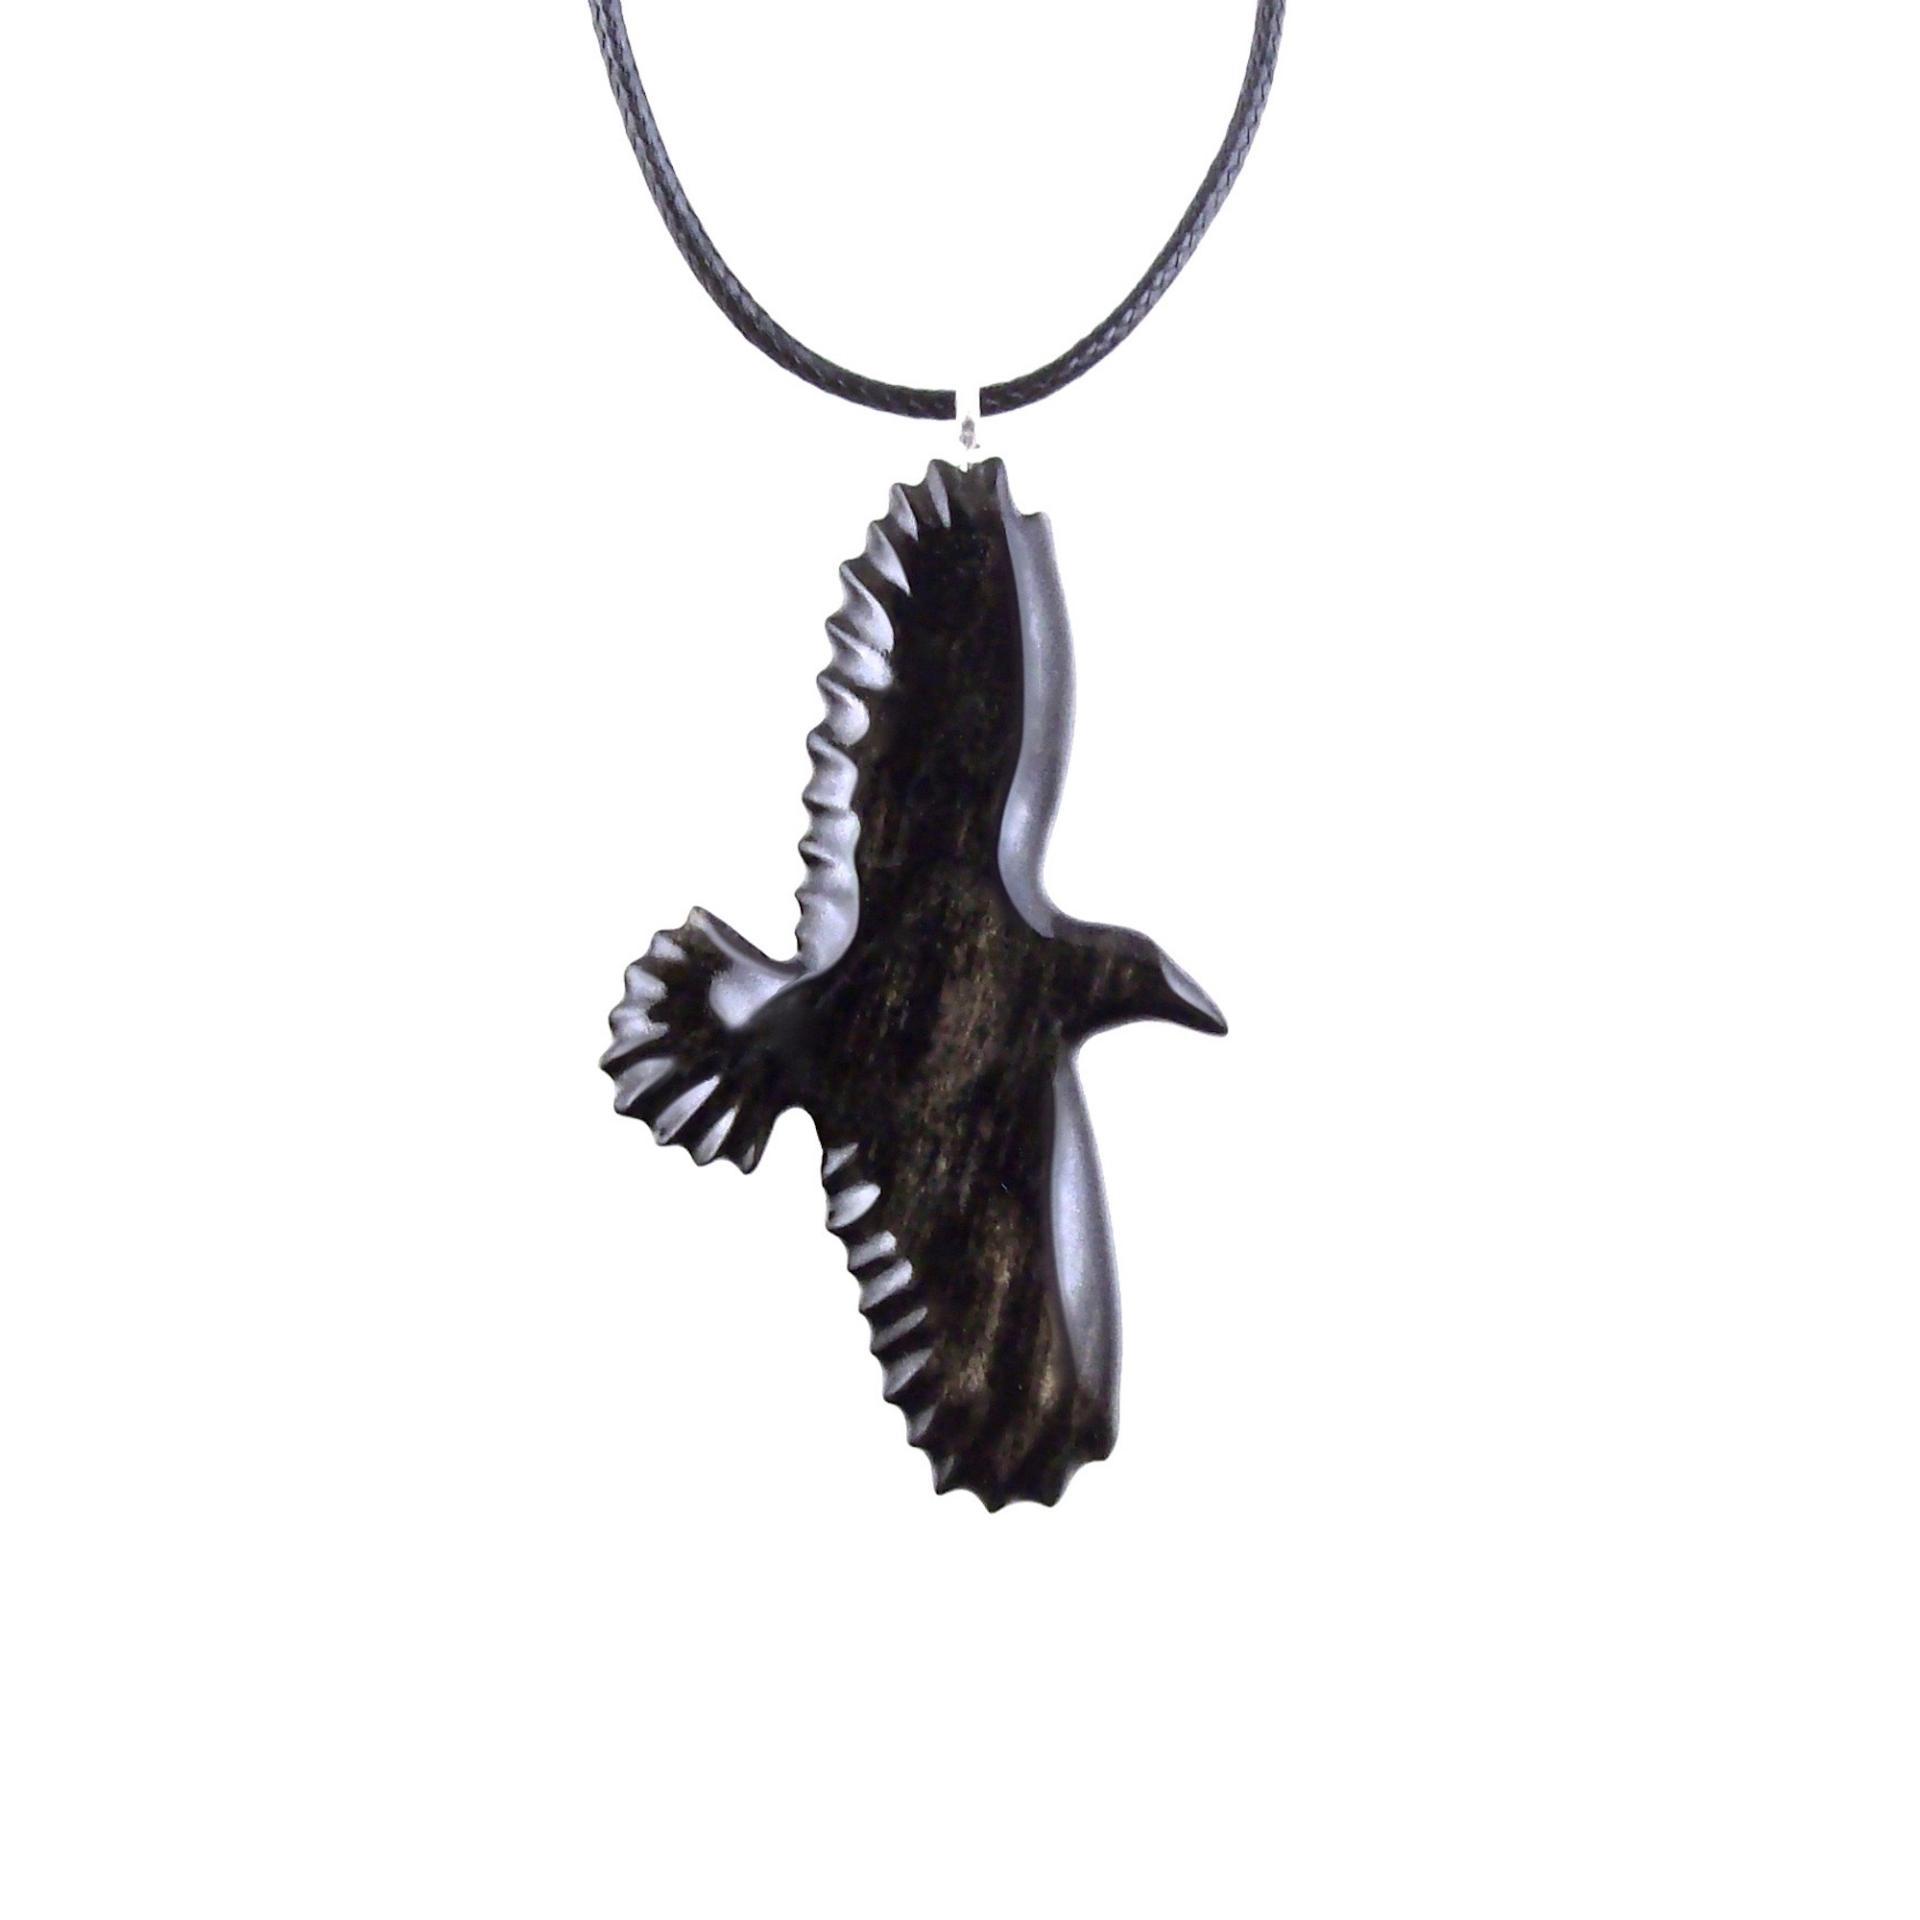 Hand Carved Crow Pendant, Raven Necklace, Wooden Raven Pendant, Wood Crow Necklace, Totem Spirit Animal Jewelry Gift for Him Her